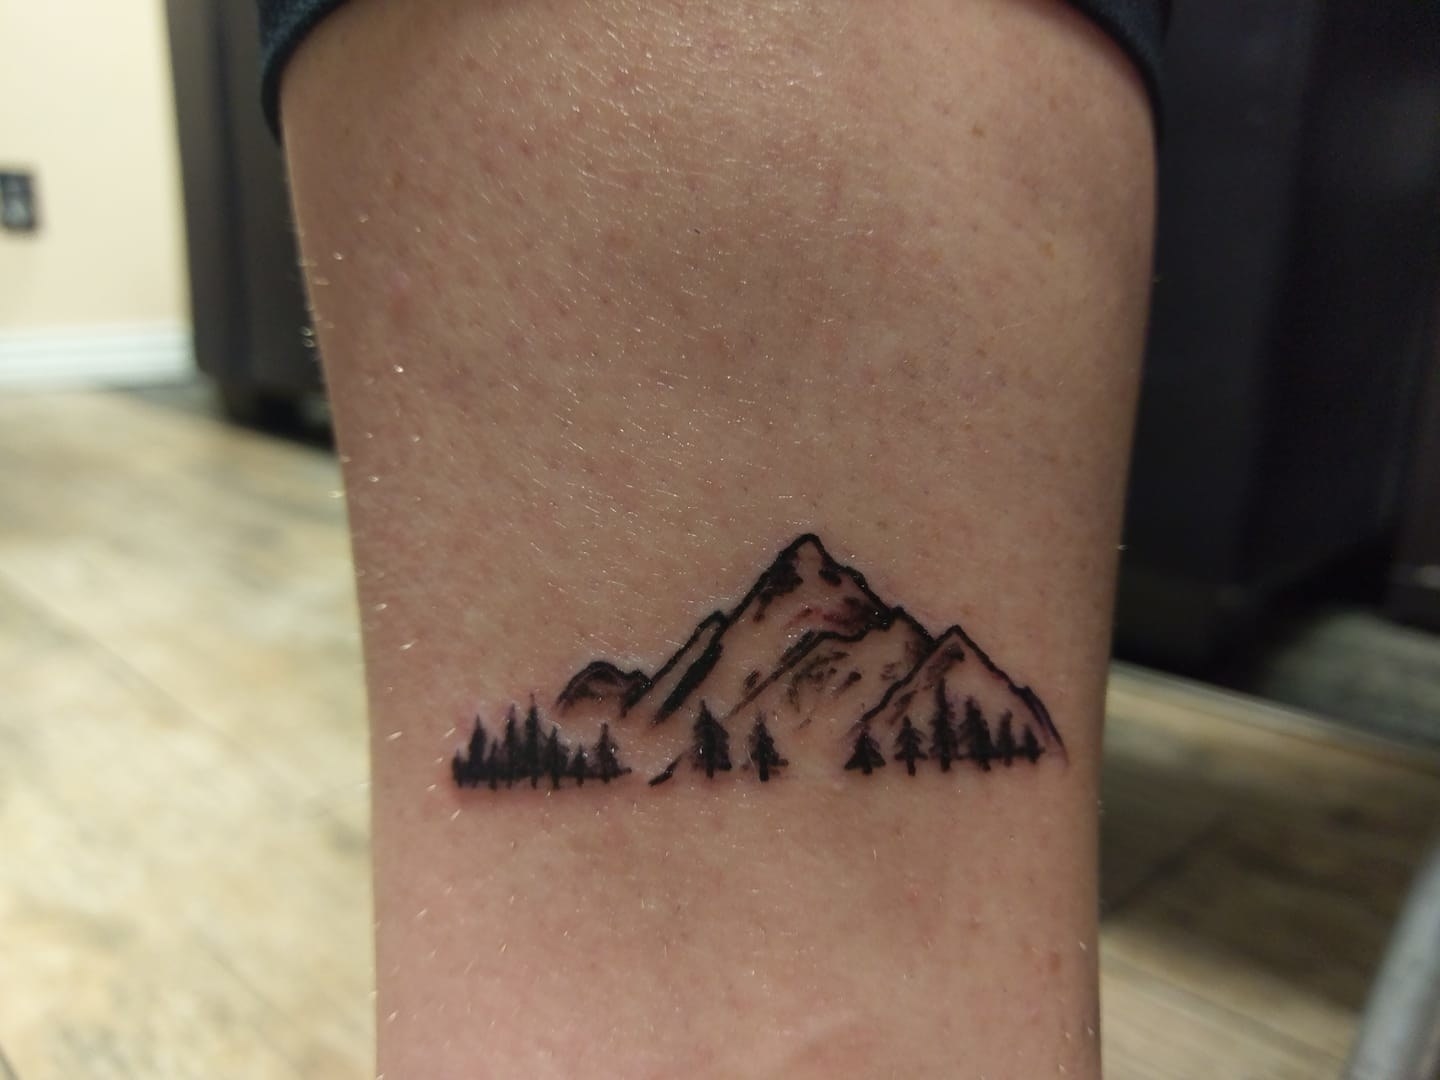 24 Tattoos People Have That Are A Permanent Reminder Of Their Overseas Trip